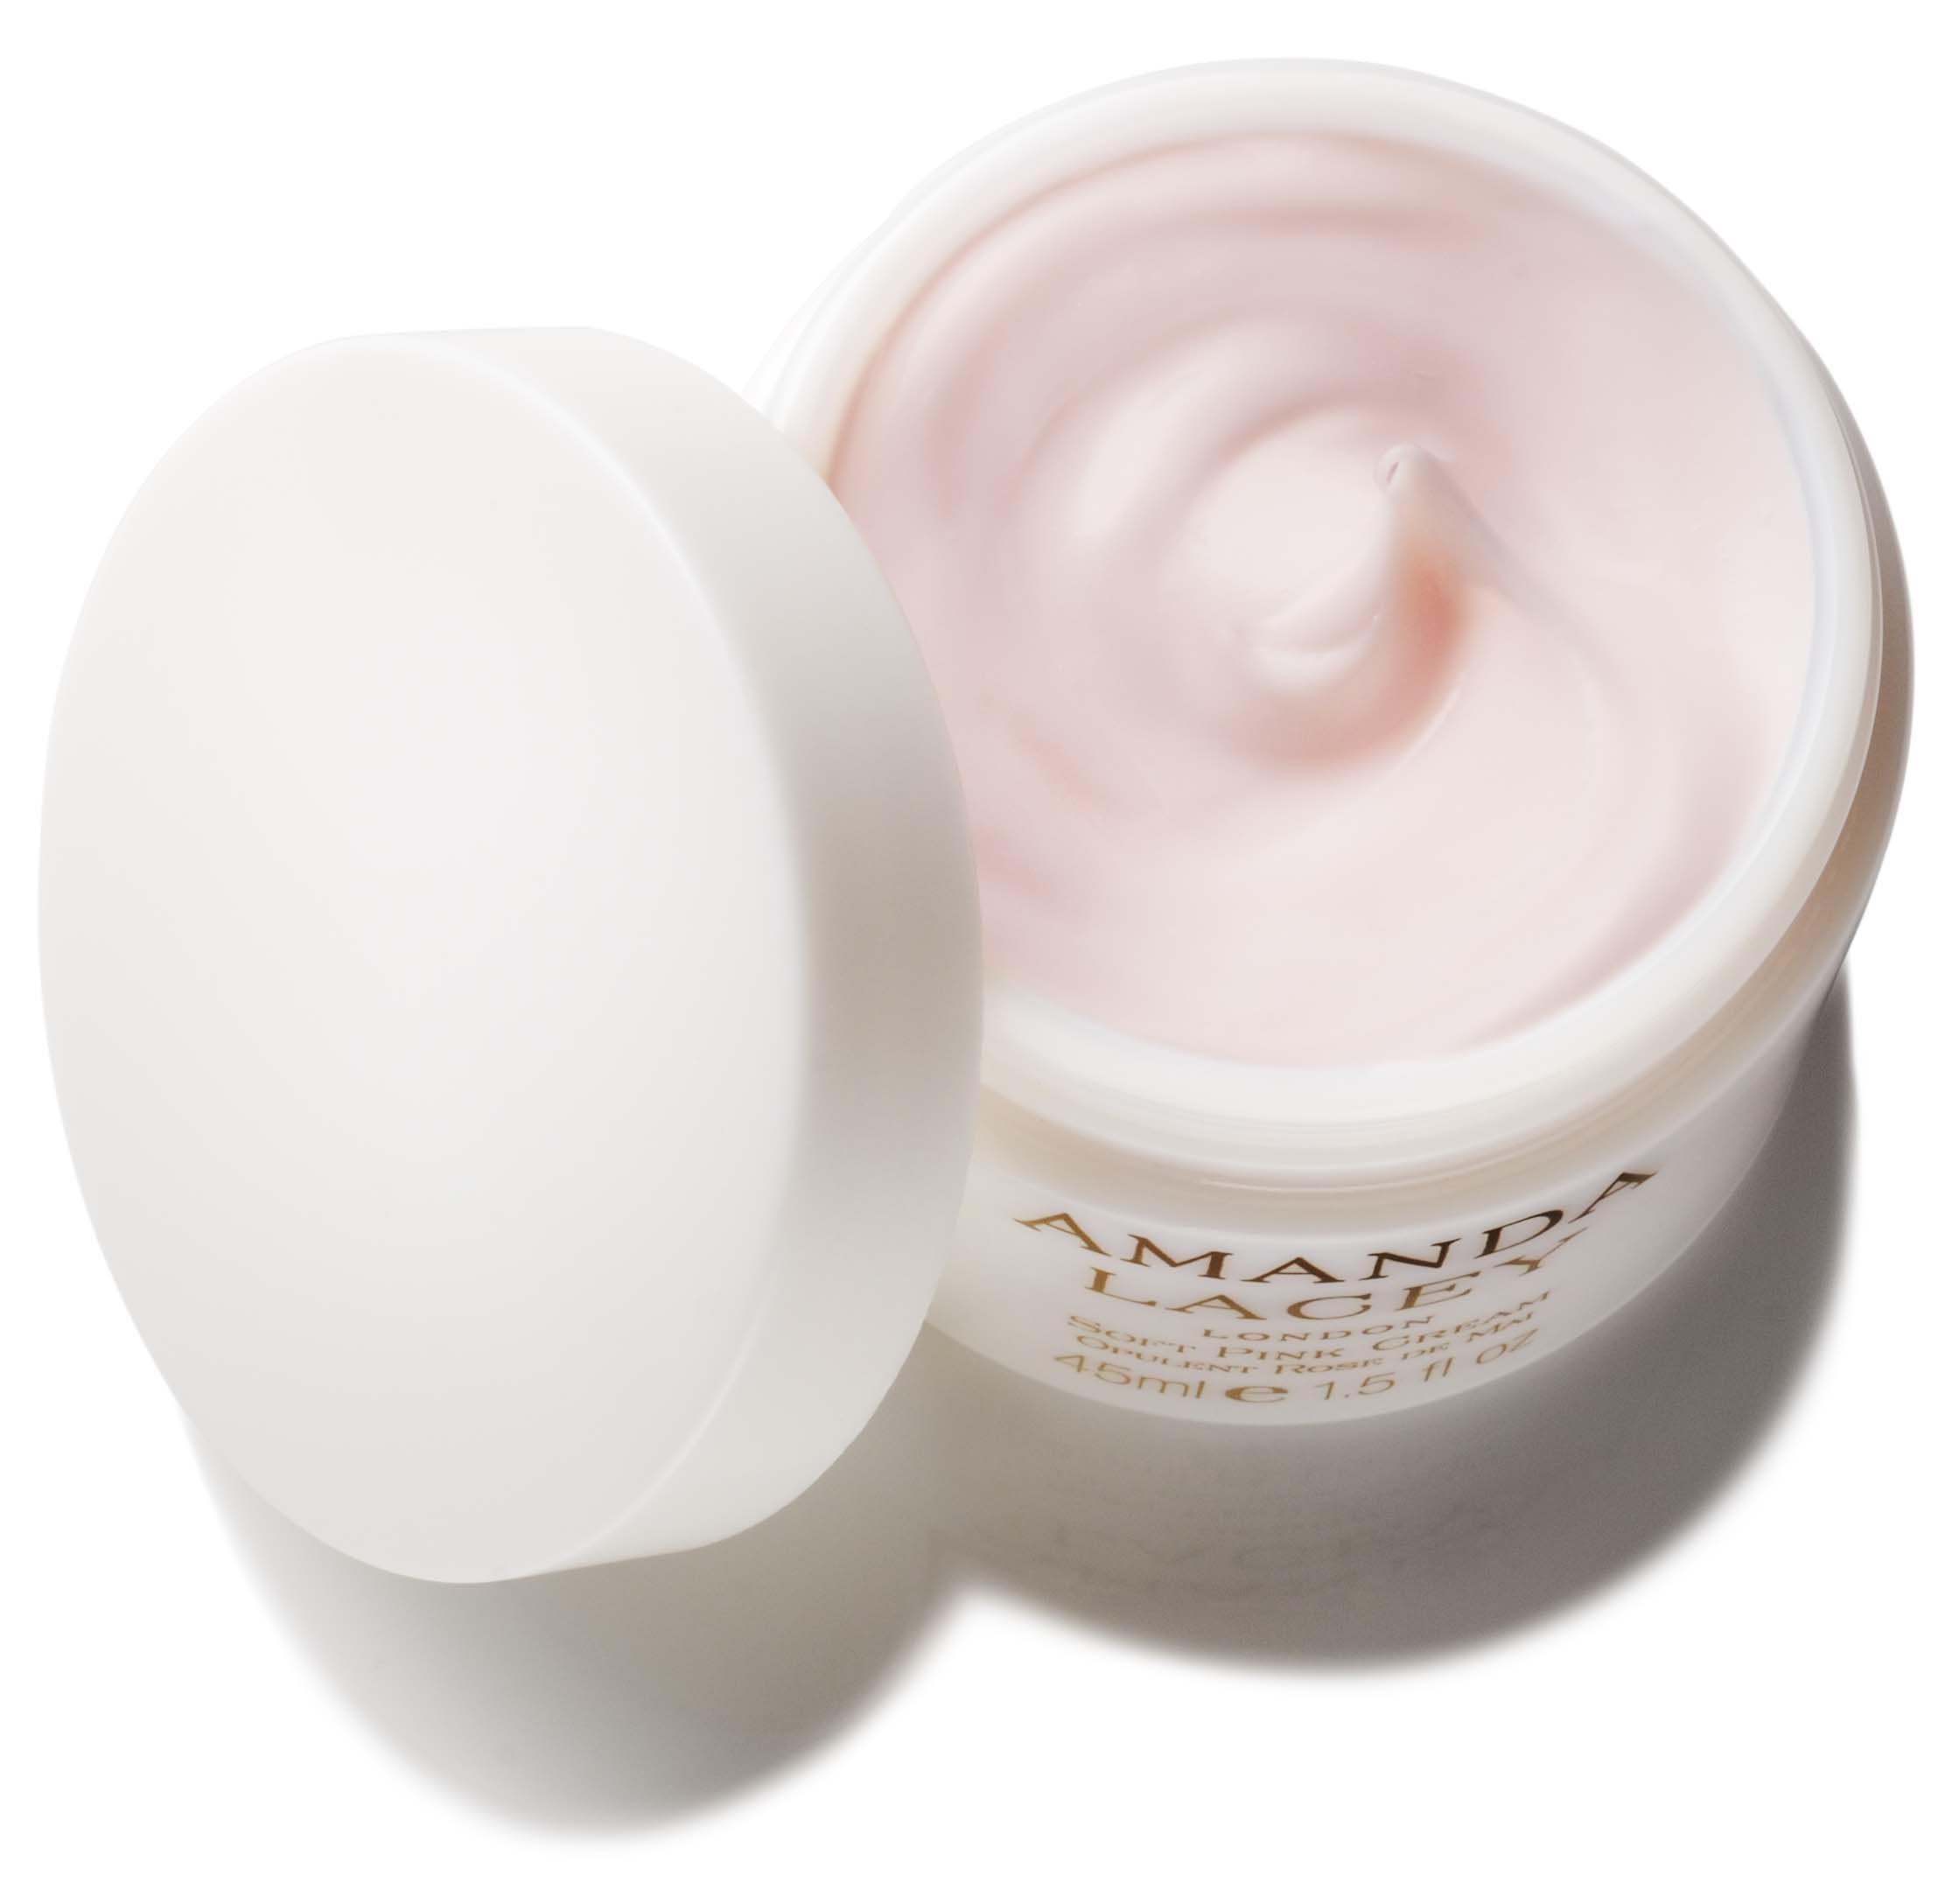 amanda lacey skincare fragrance luxury beauty facialist cleansing products facials soft pink cream london